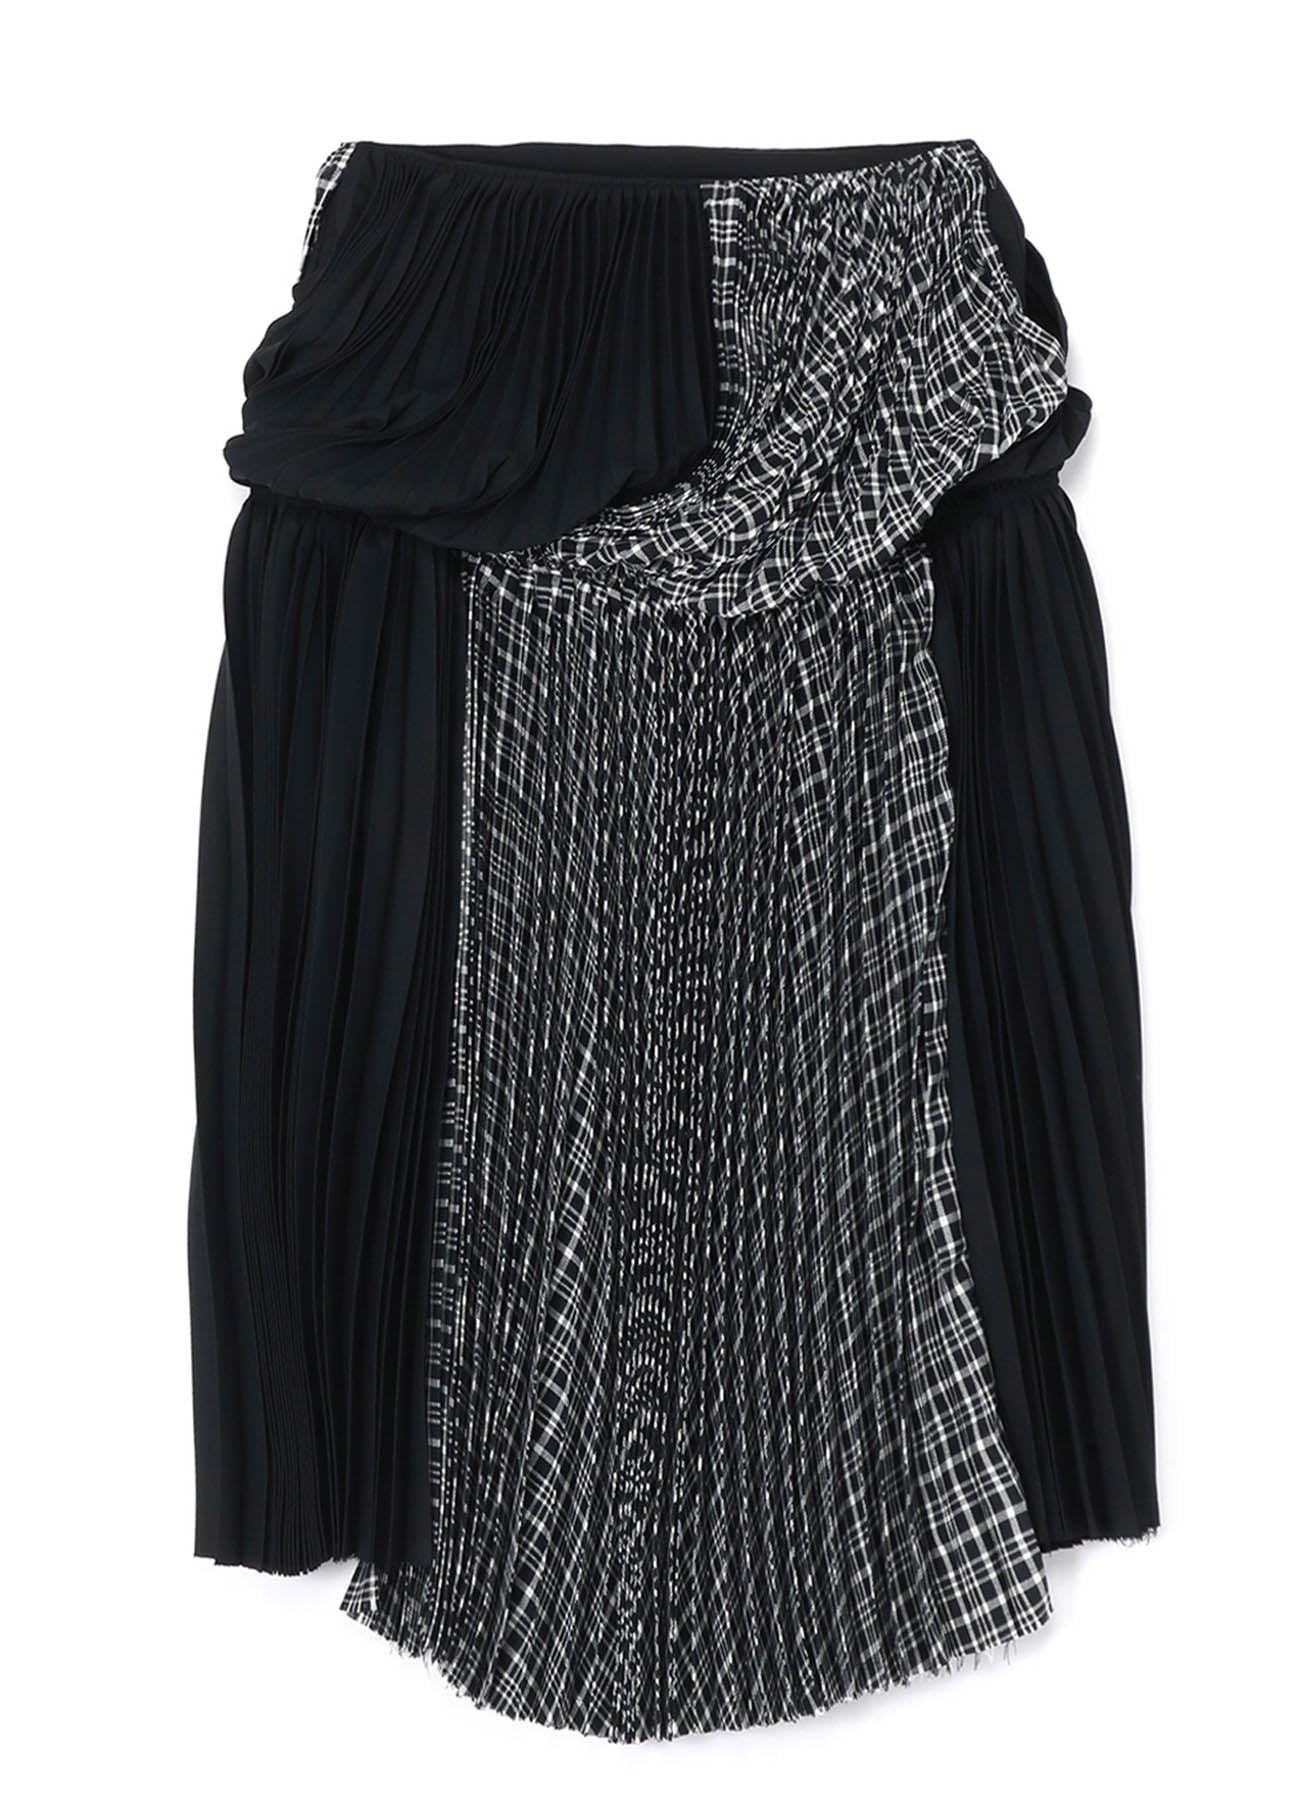 PLEATED SKIRT WITH TWISTED DESIGN(S BlackxBlack): Vintage 1.1｜THE 